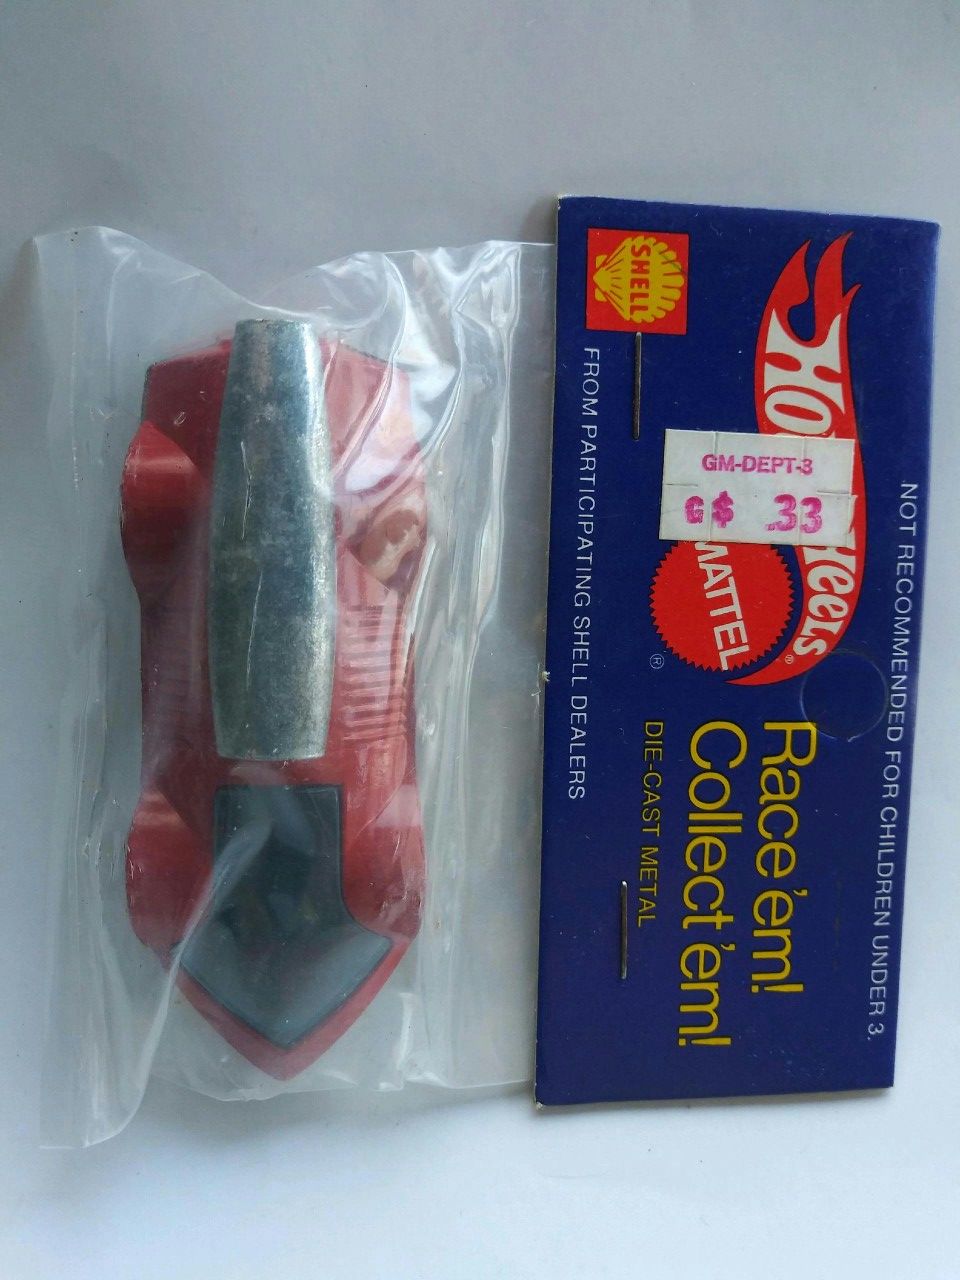 HOTWHEELS 1973 Red Shell promotion car.